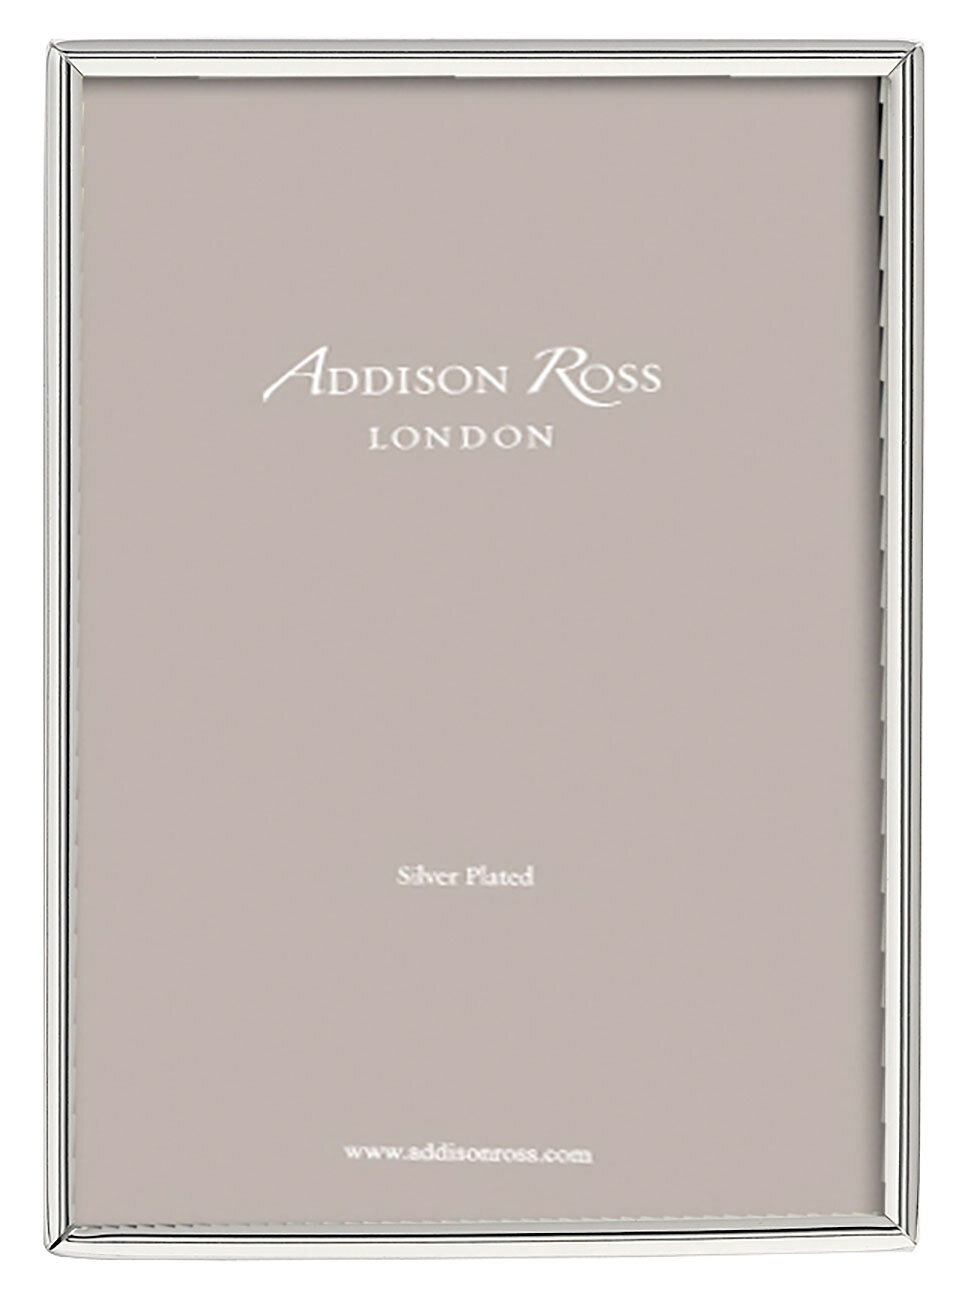 Addison Ross Fine Edged Photo Frame 5 x 7 InchSilver-plated FR0056